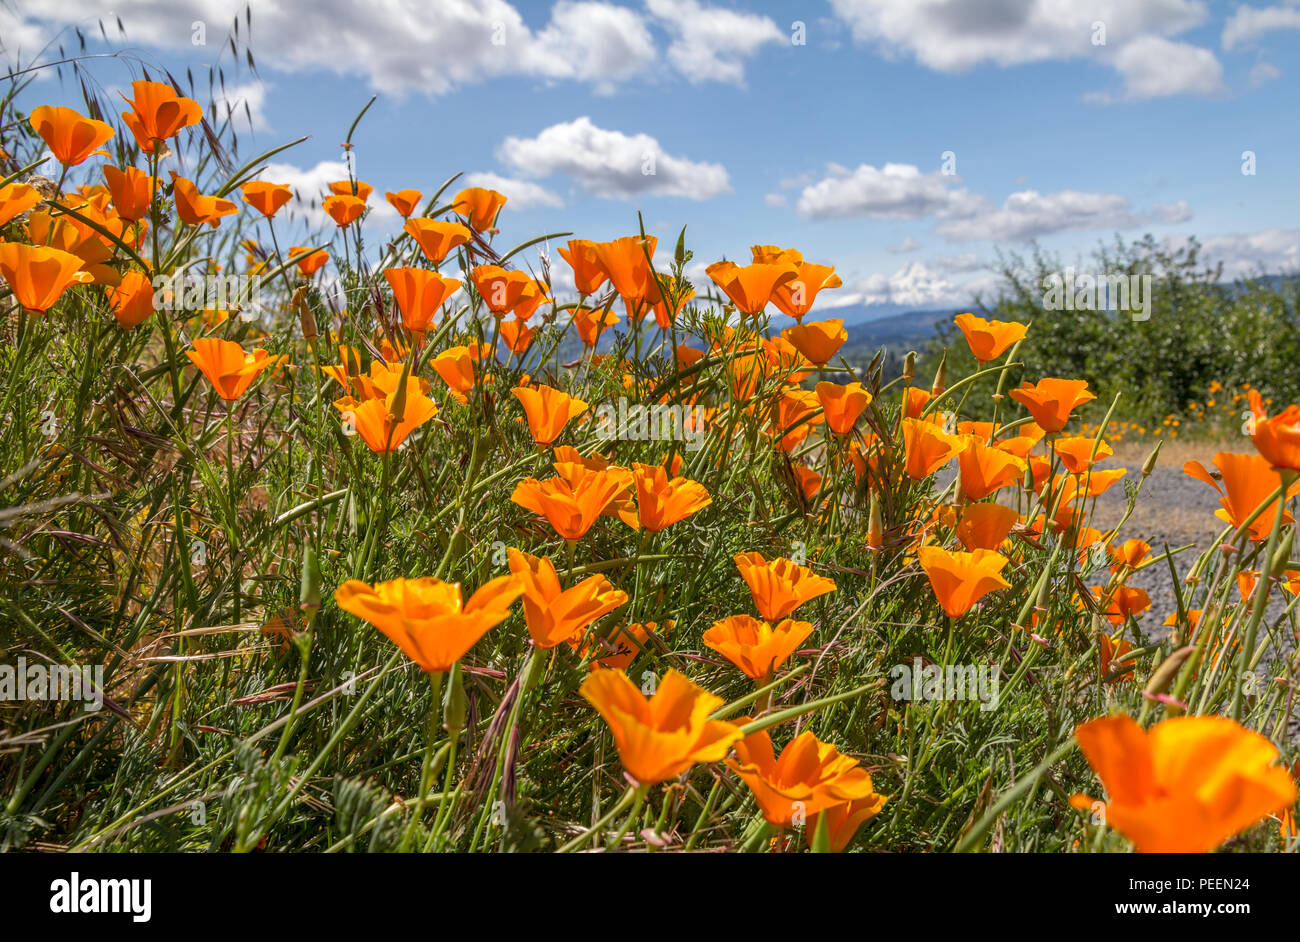 Vibrant orange California Poppies fill bottom left triangle of image. Beyond, blurred by shallow depth-of-field is Oregon's highest peak: Mount Hood Stock Photo